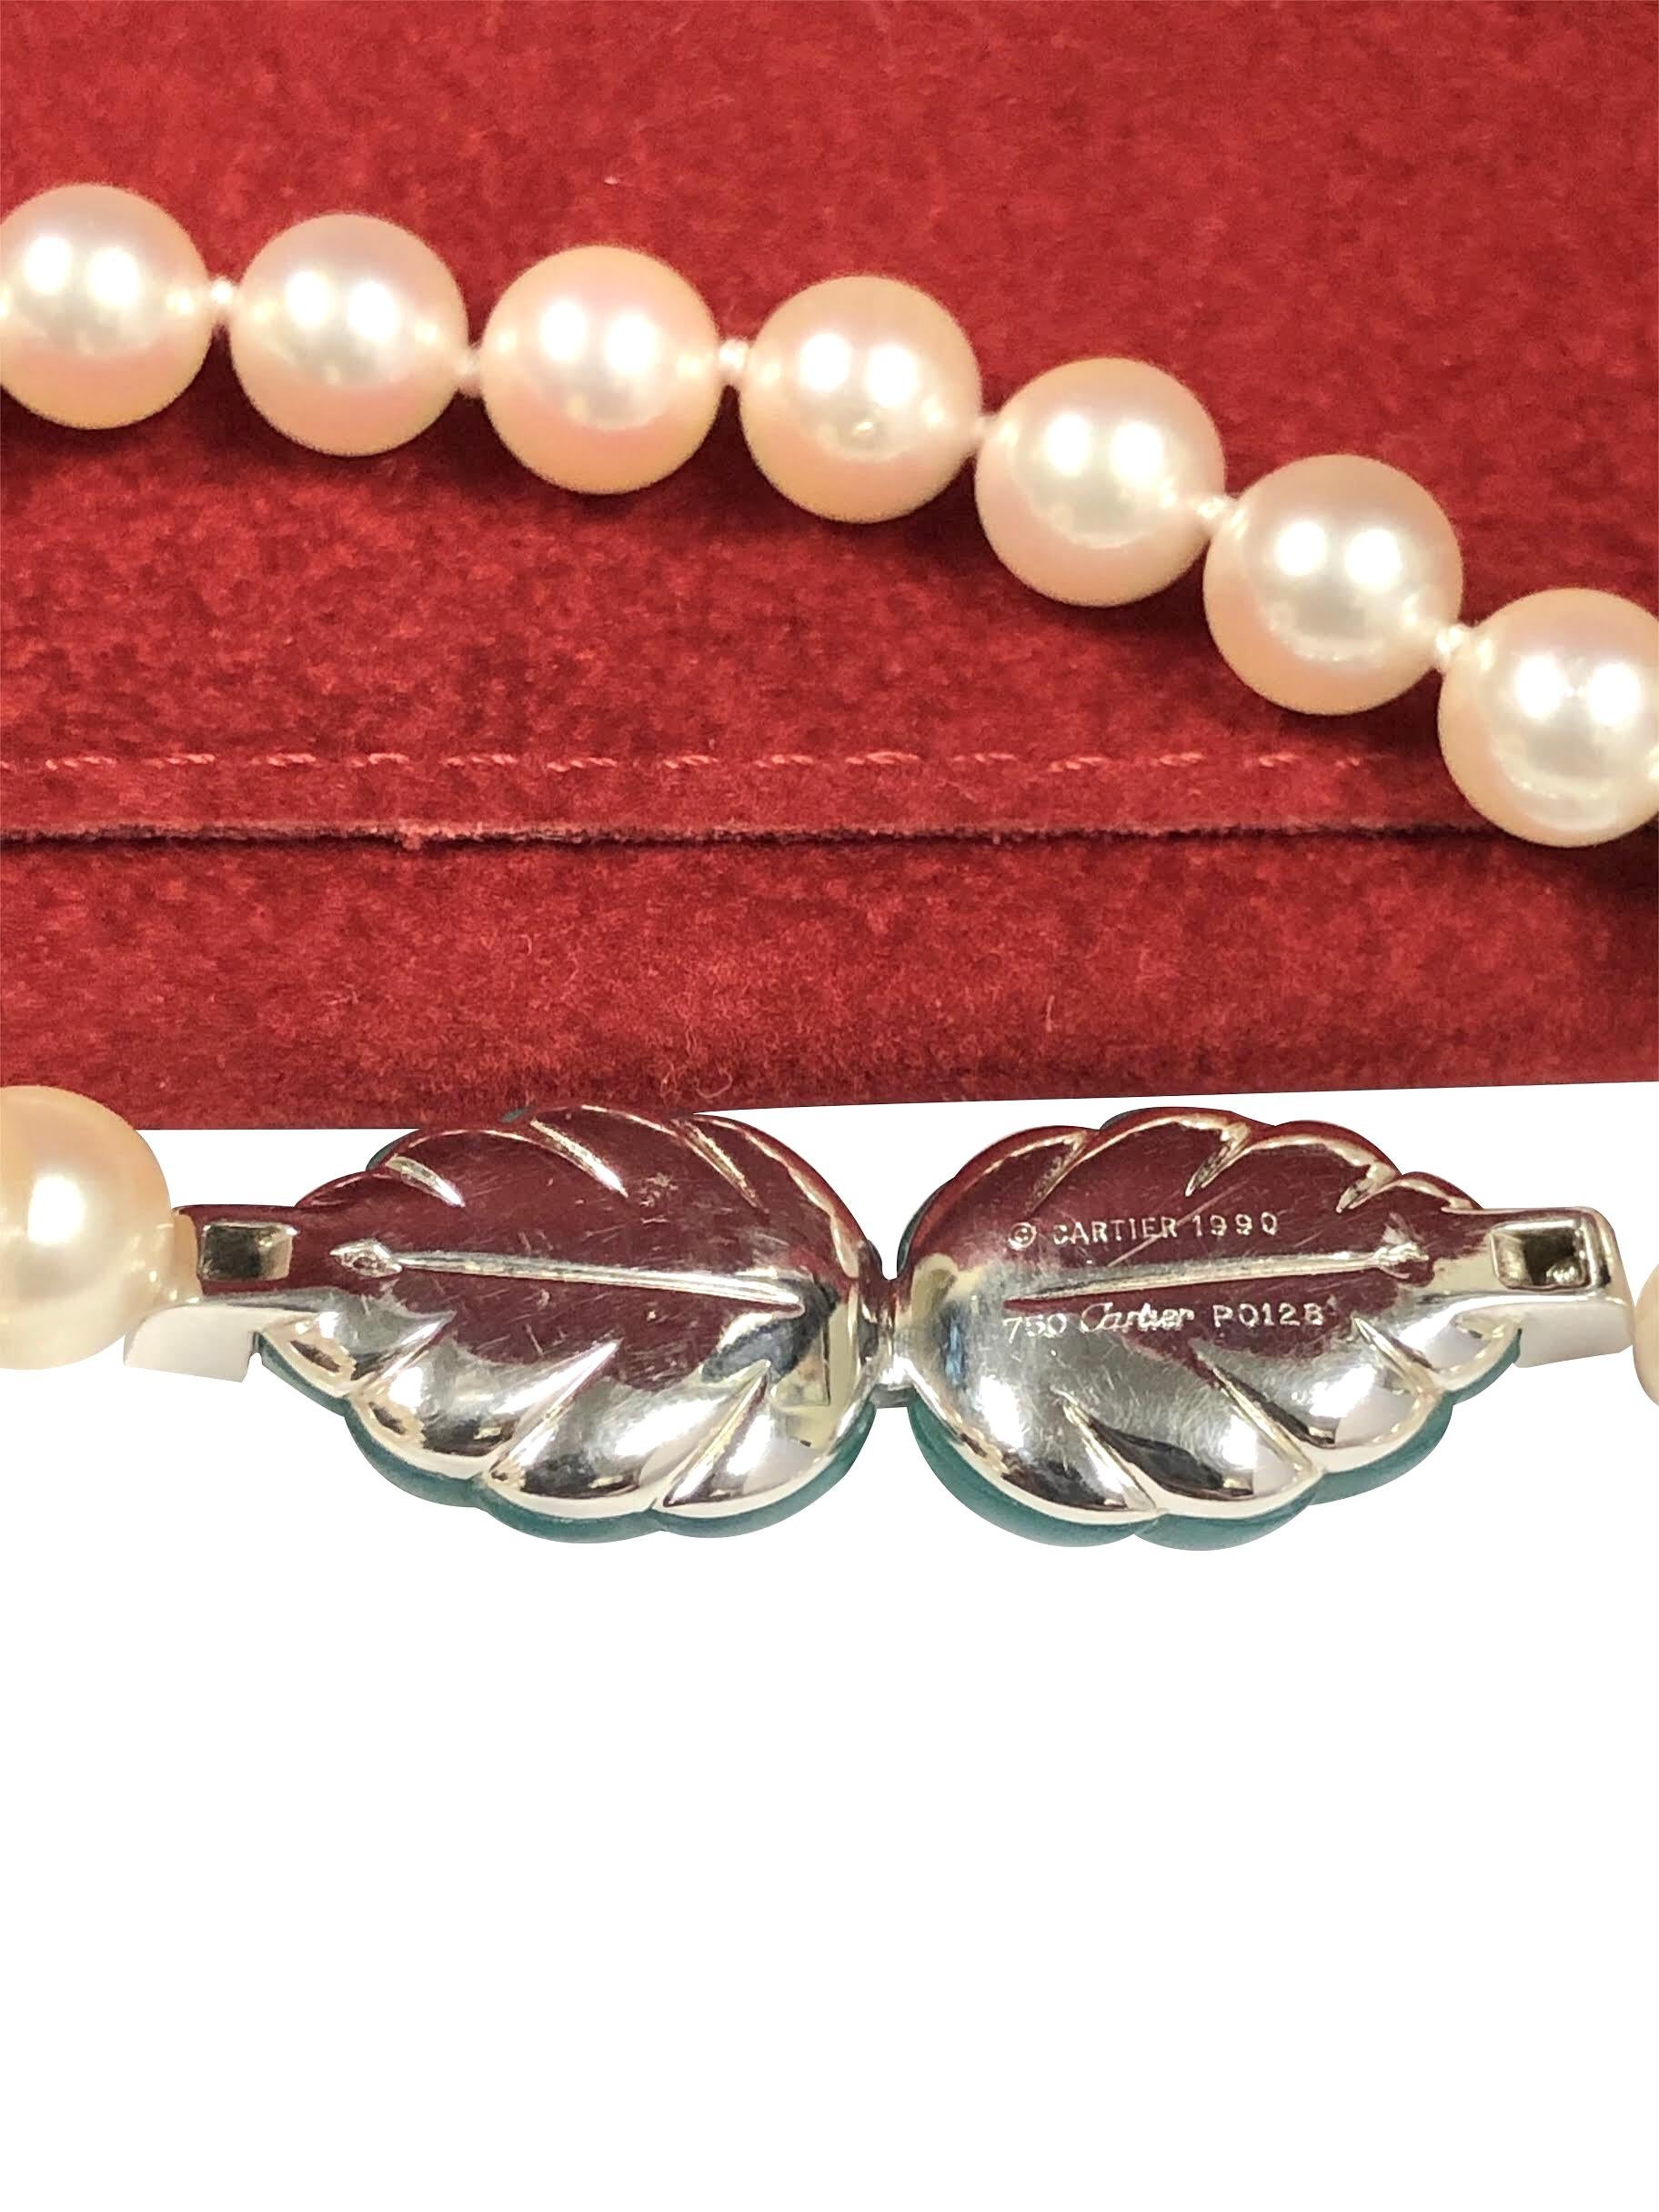 Circa 1990 Cartier Necklace, measuring 16 inches in length and comprised of 6.5 M.M. very Fine color and Luster Akoya  Cultured Pearls. The center section measures 1 1/4 X 1/2 inch and is White Gold with hand carved Green Chrysoprase Leaves and